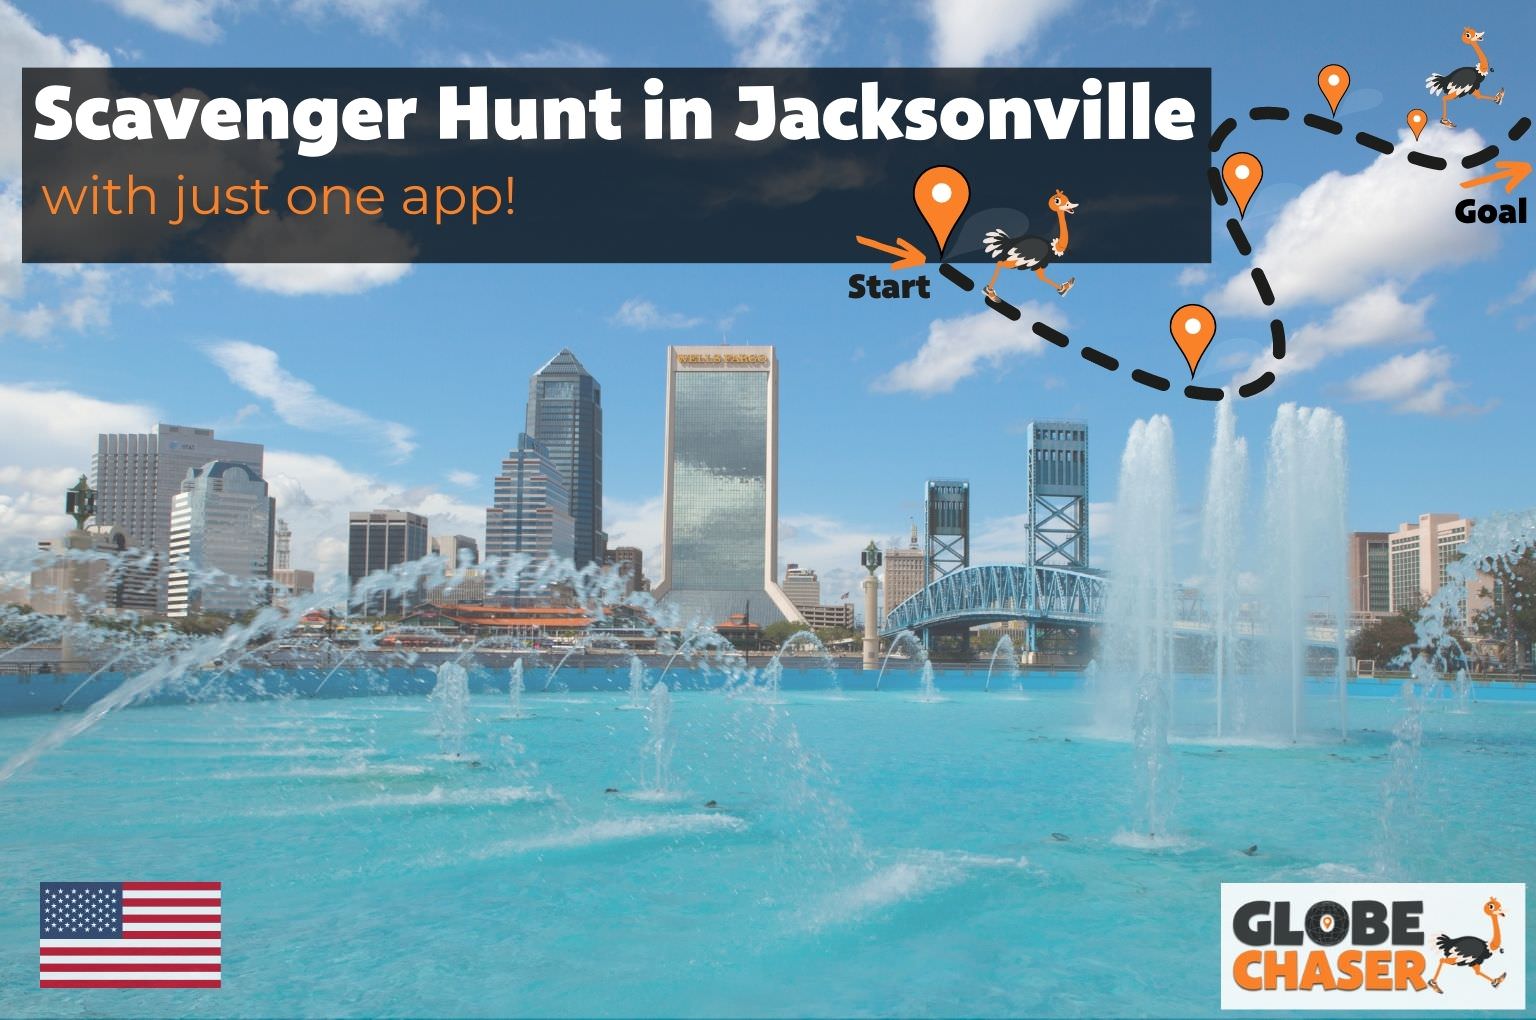 Scavenger Hunt in Jacksonville, USA - Family Activities with the Globe Chaser App for Outdoor Fun